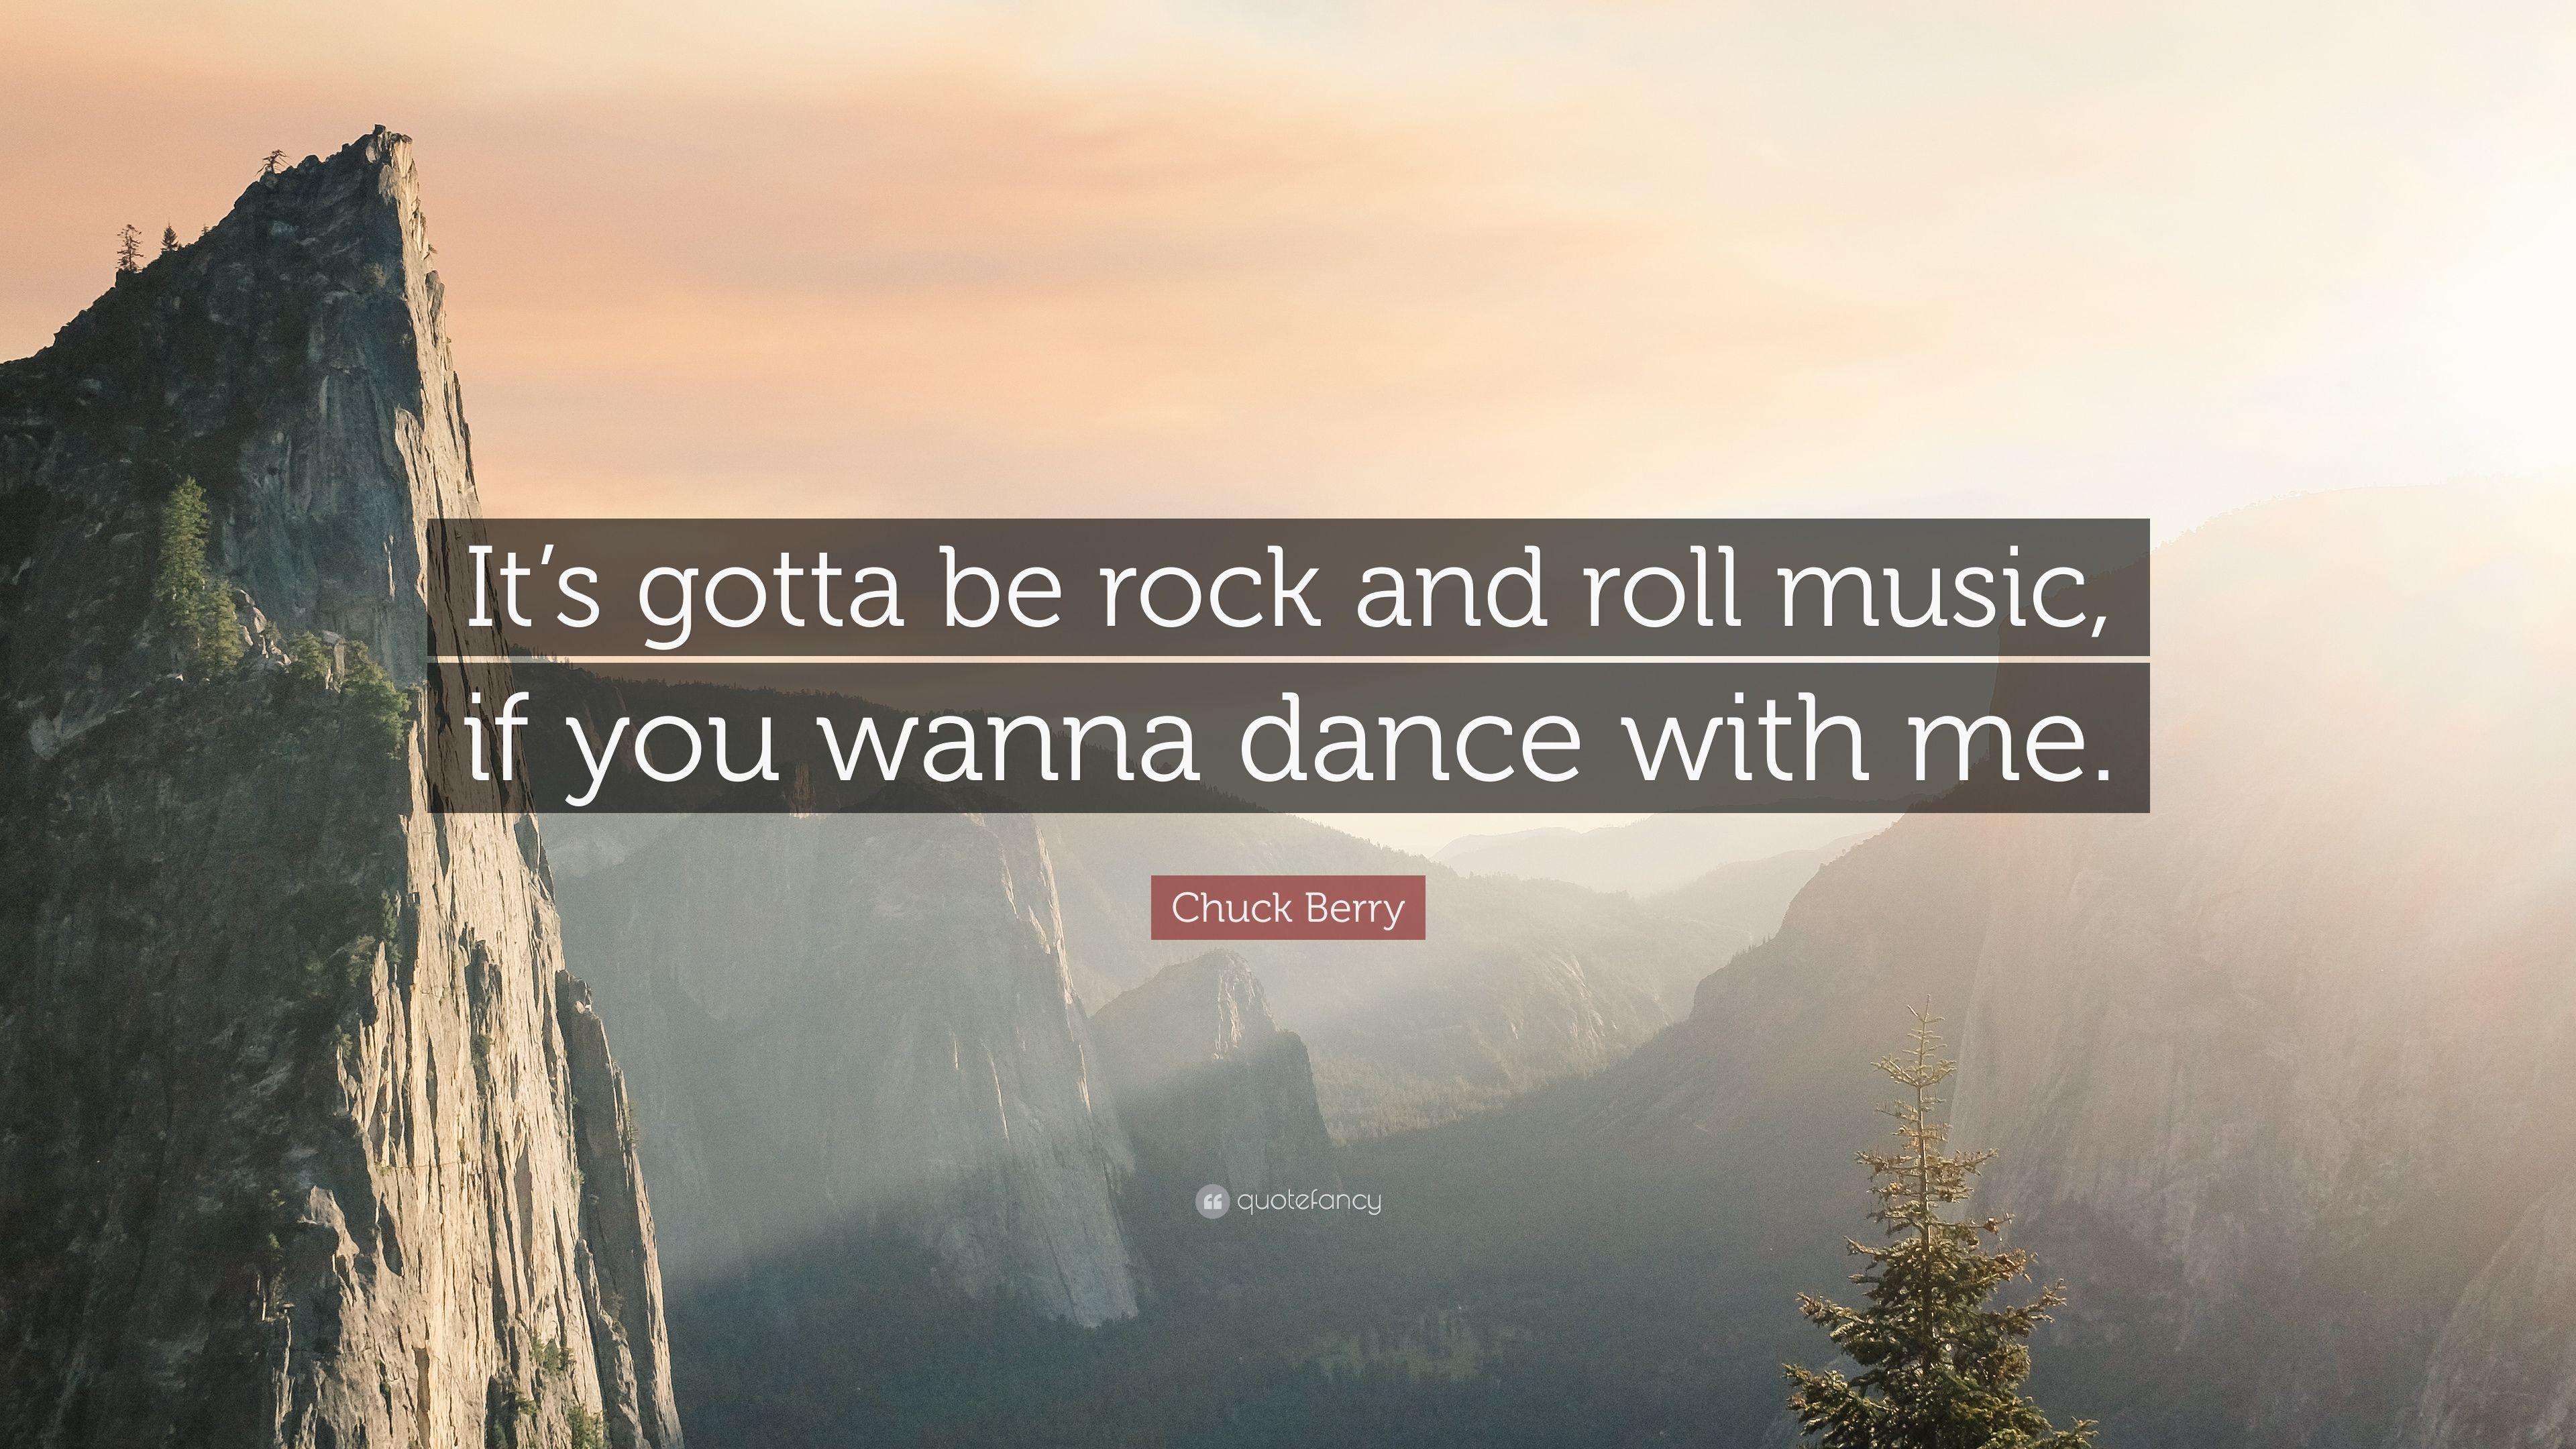 Chuck Berry Quote: “It's gotta be rock and roll music, if you